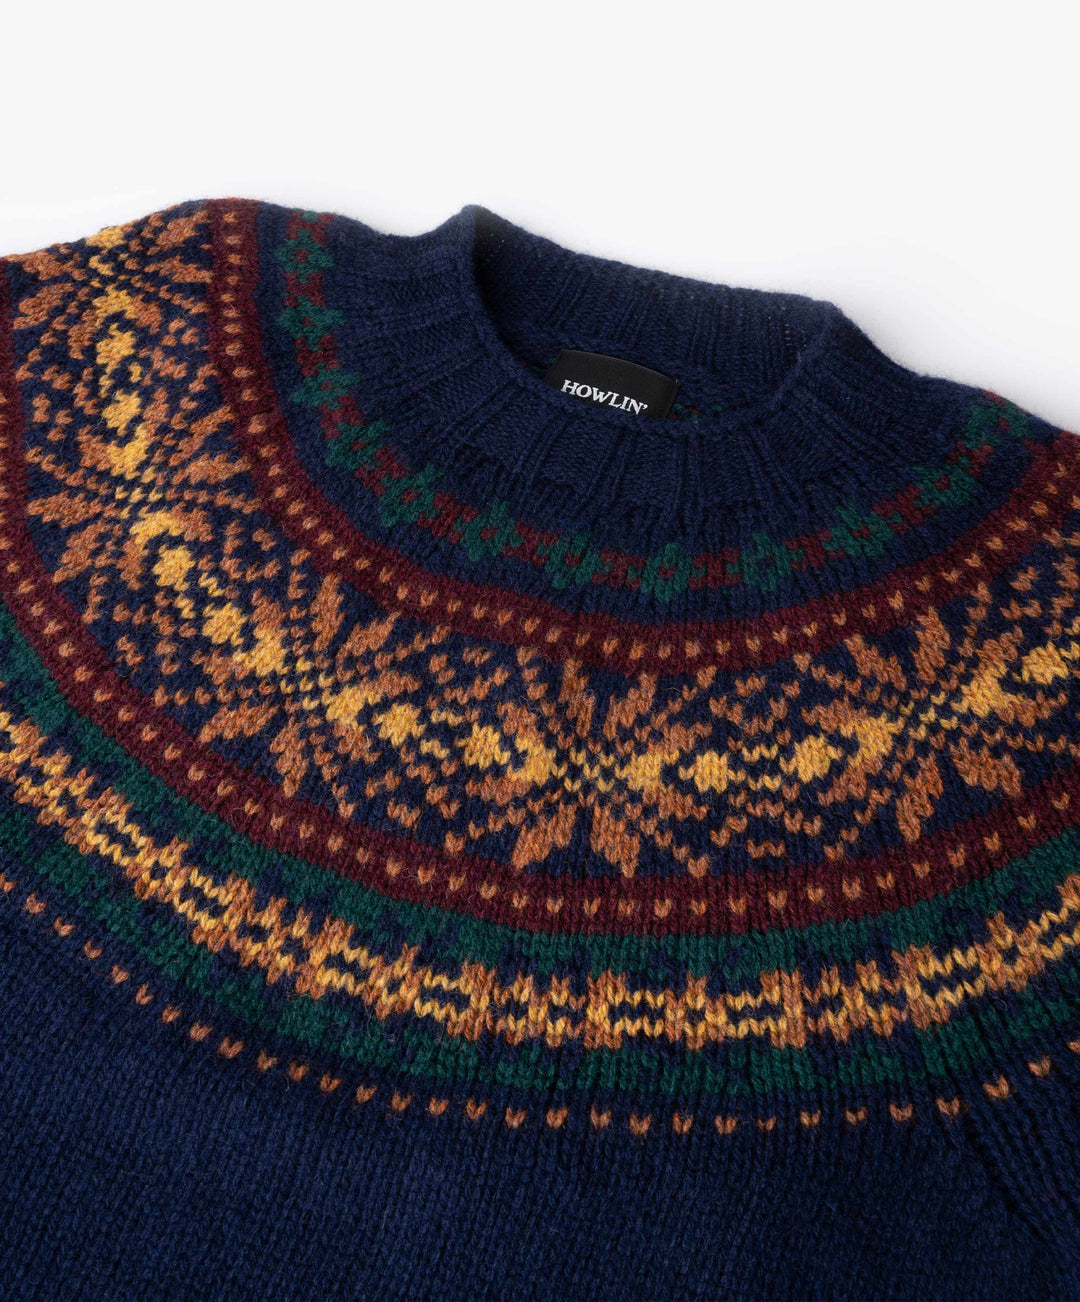 Howlin' Fragments Of Light Sweater - Navy